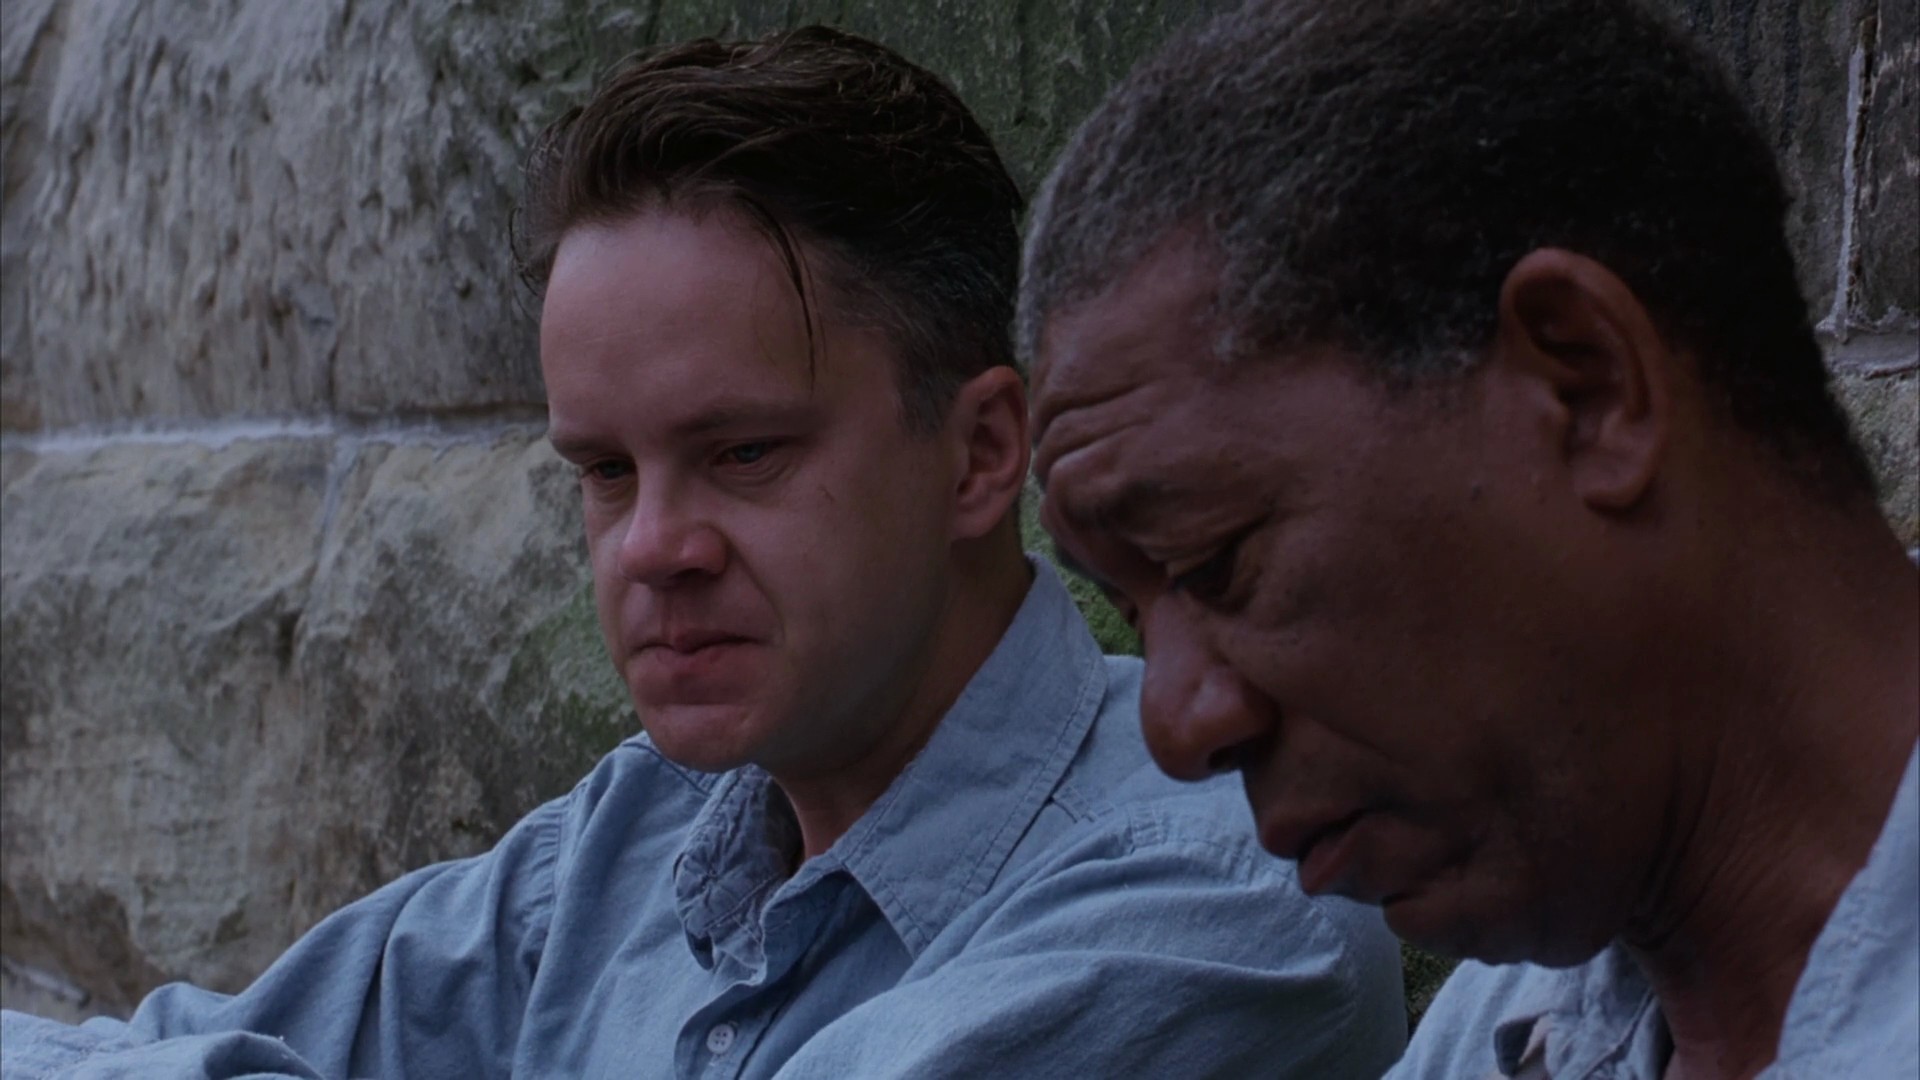 1920x1080 Download Convert View Source. Tagged on : The Shawshank Redemption Movie  High Resolution Wallpaper